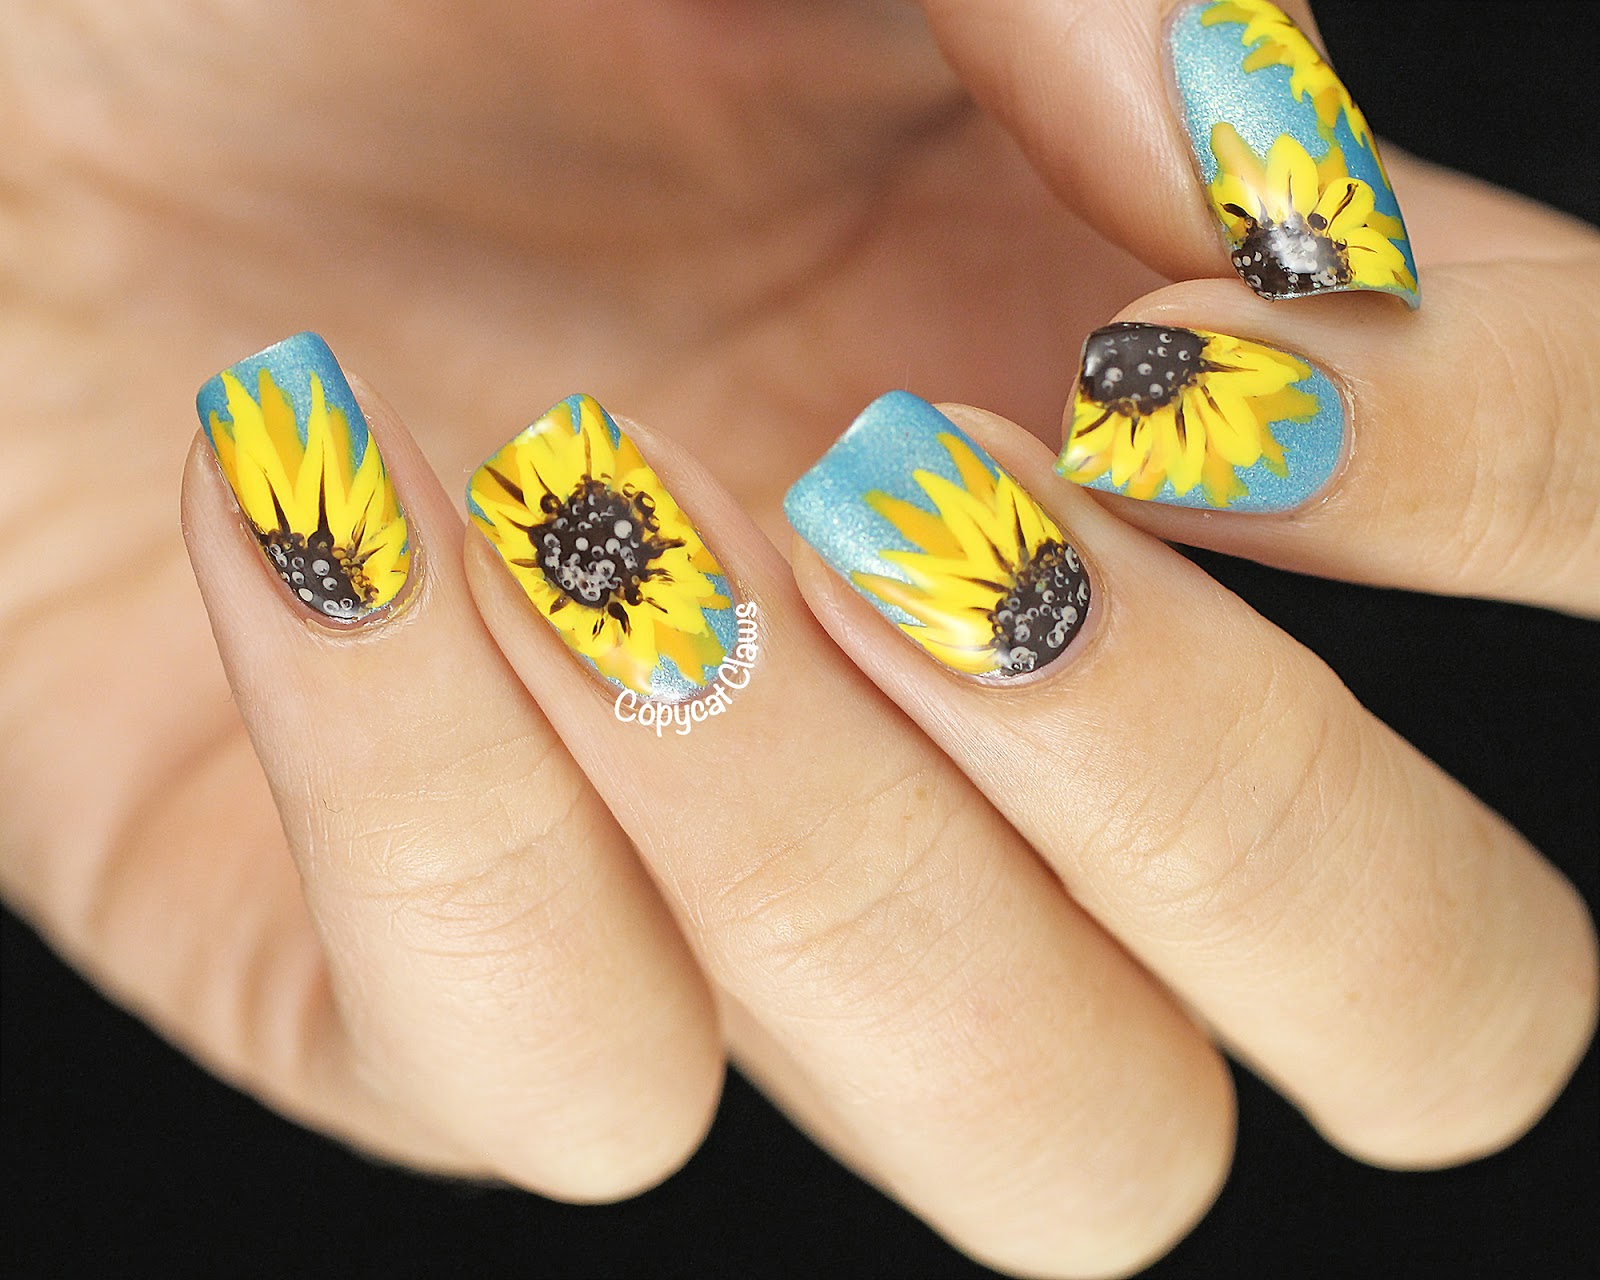 10. Red and Yellow Sunflower Nails - wide 3